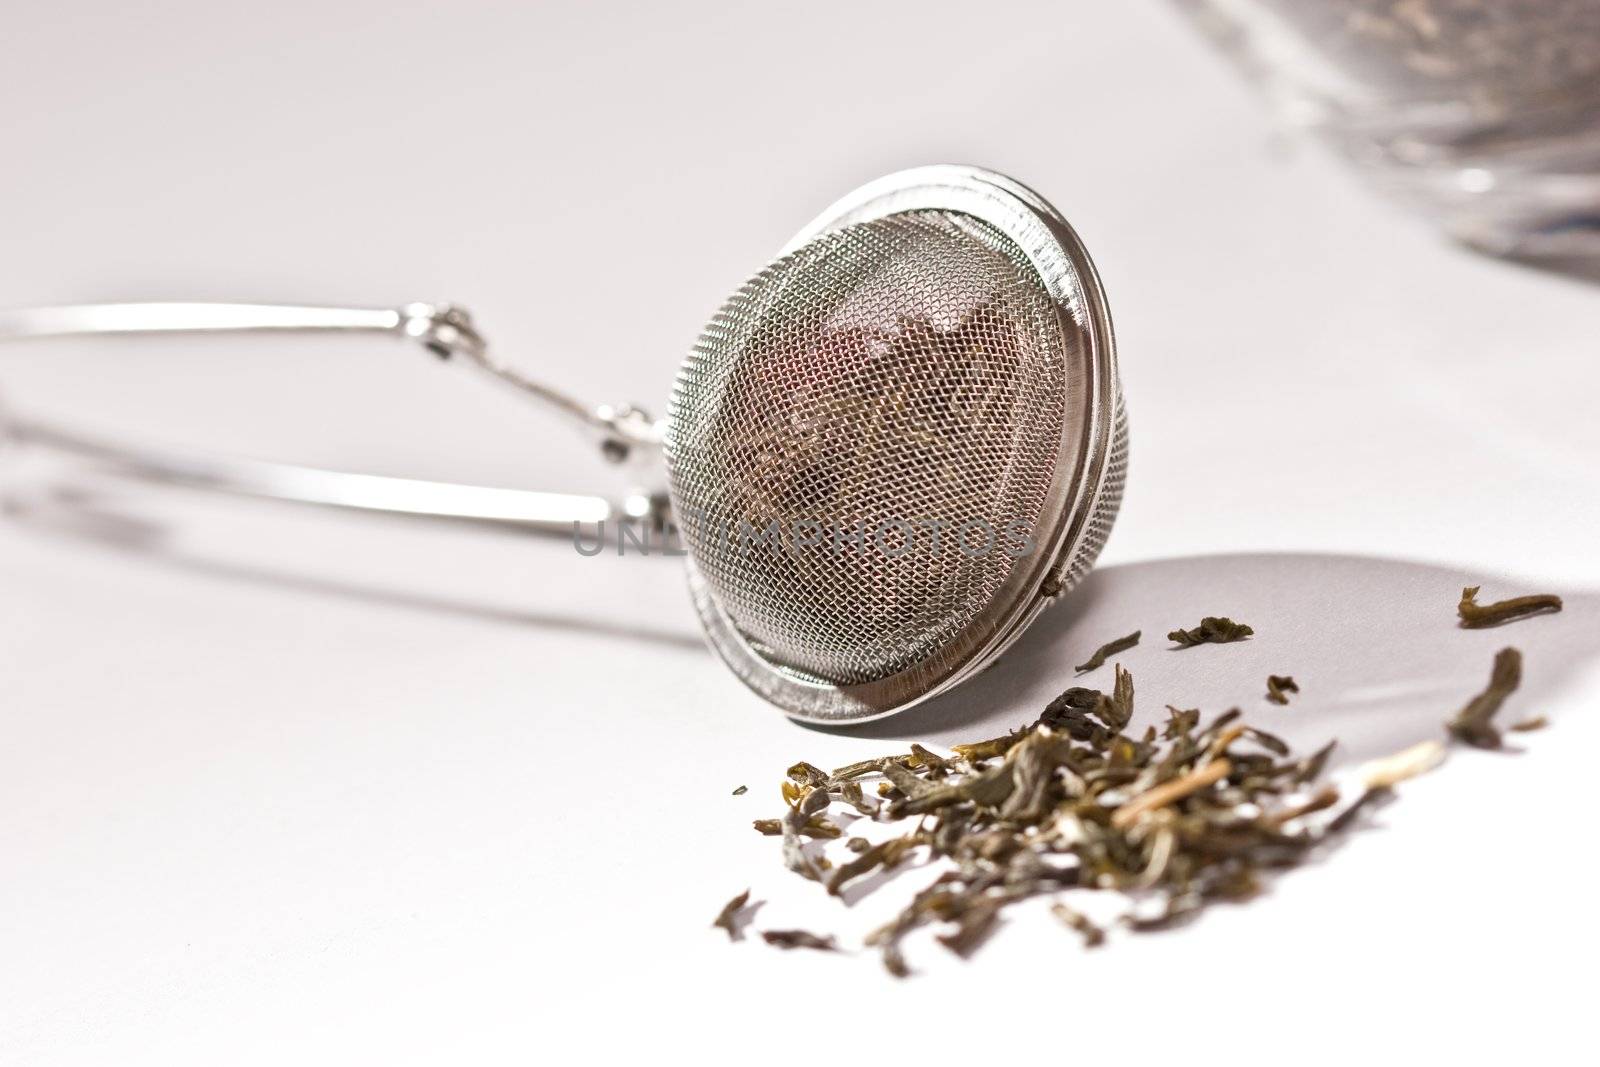 Macro picture of a tea STRAINER over white